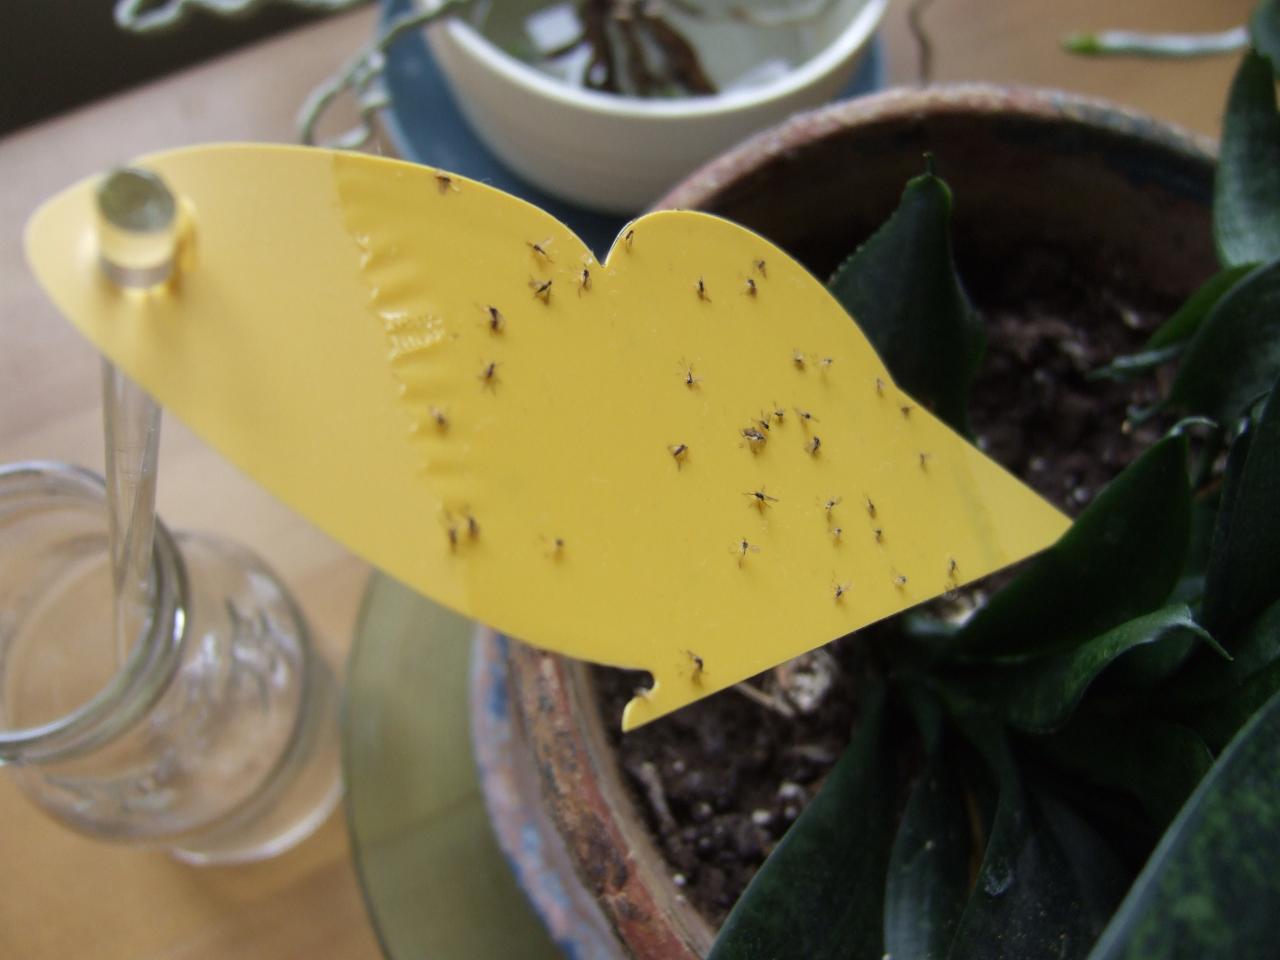 Whitefly Fly Traps Save Your Plants Flying Insects Fruit Fly Trap and Yellow Fungus Gnat Traps for House Plants Mosquito Bits 24 Pack Yellow Sticky Traps for Indoor Outdoor Natural Pest Control